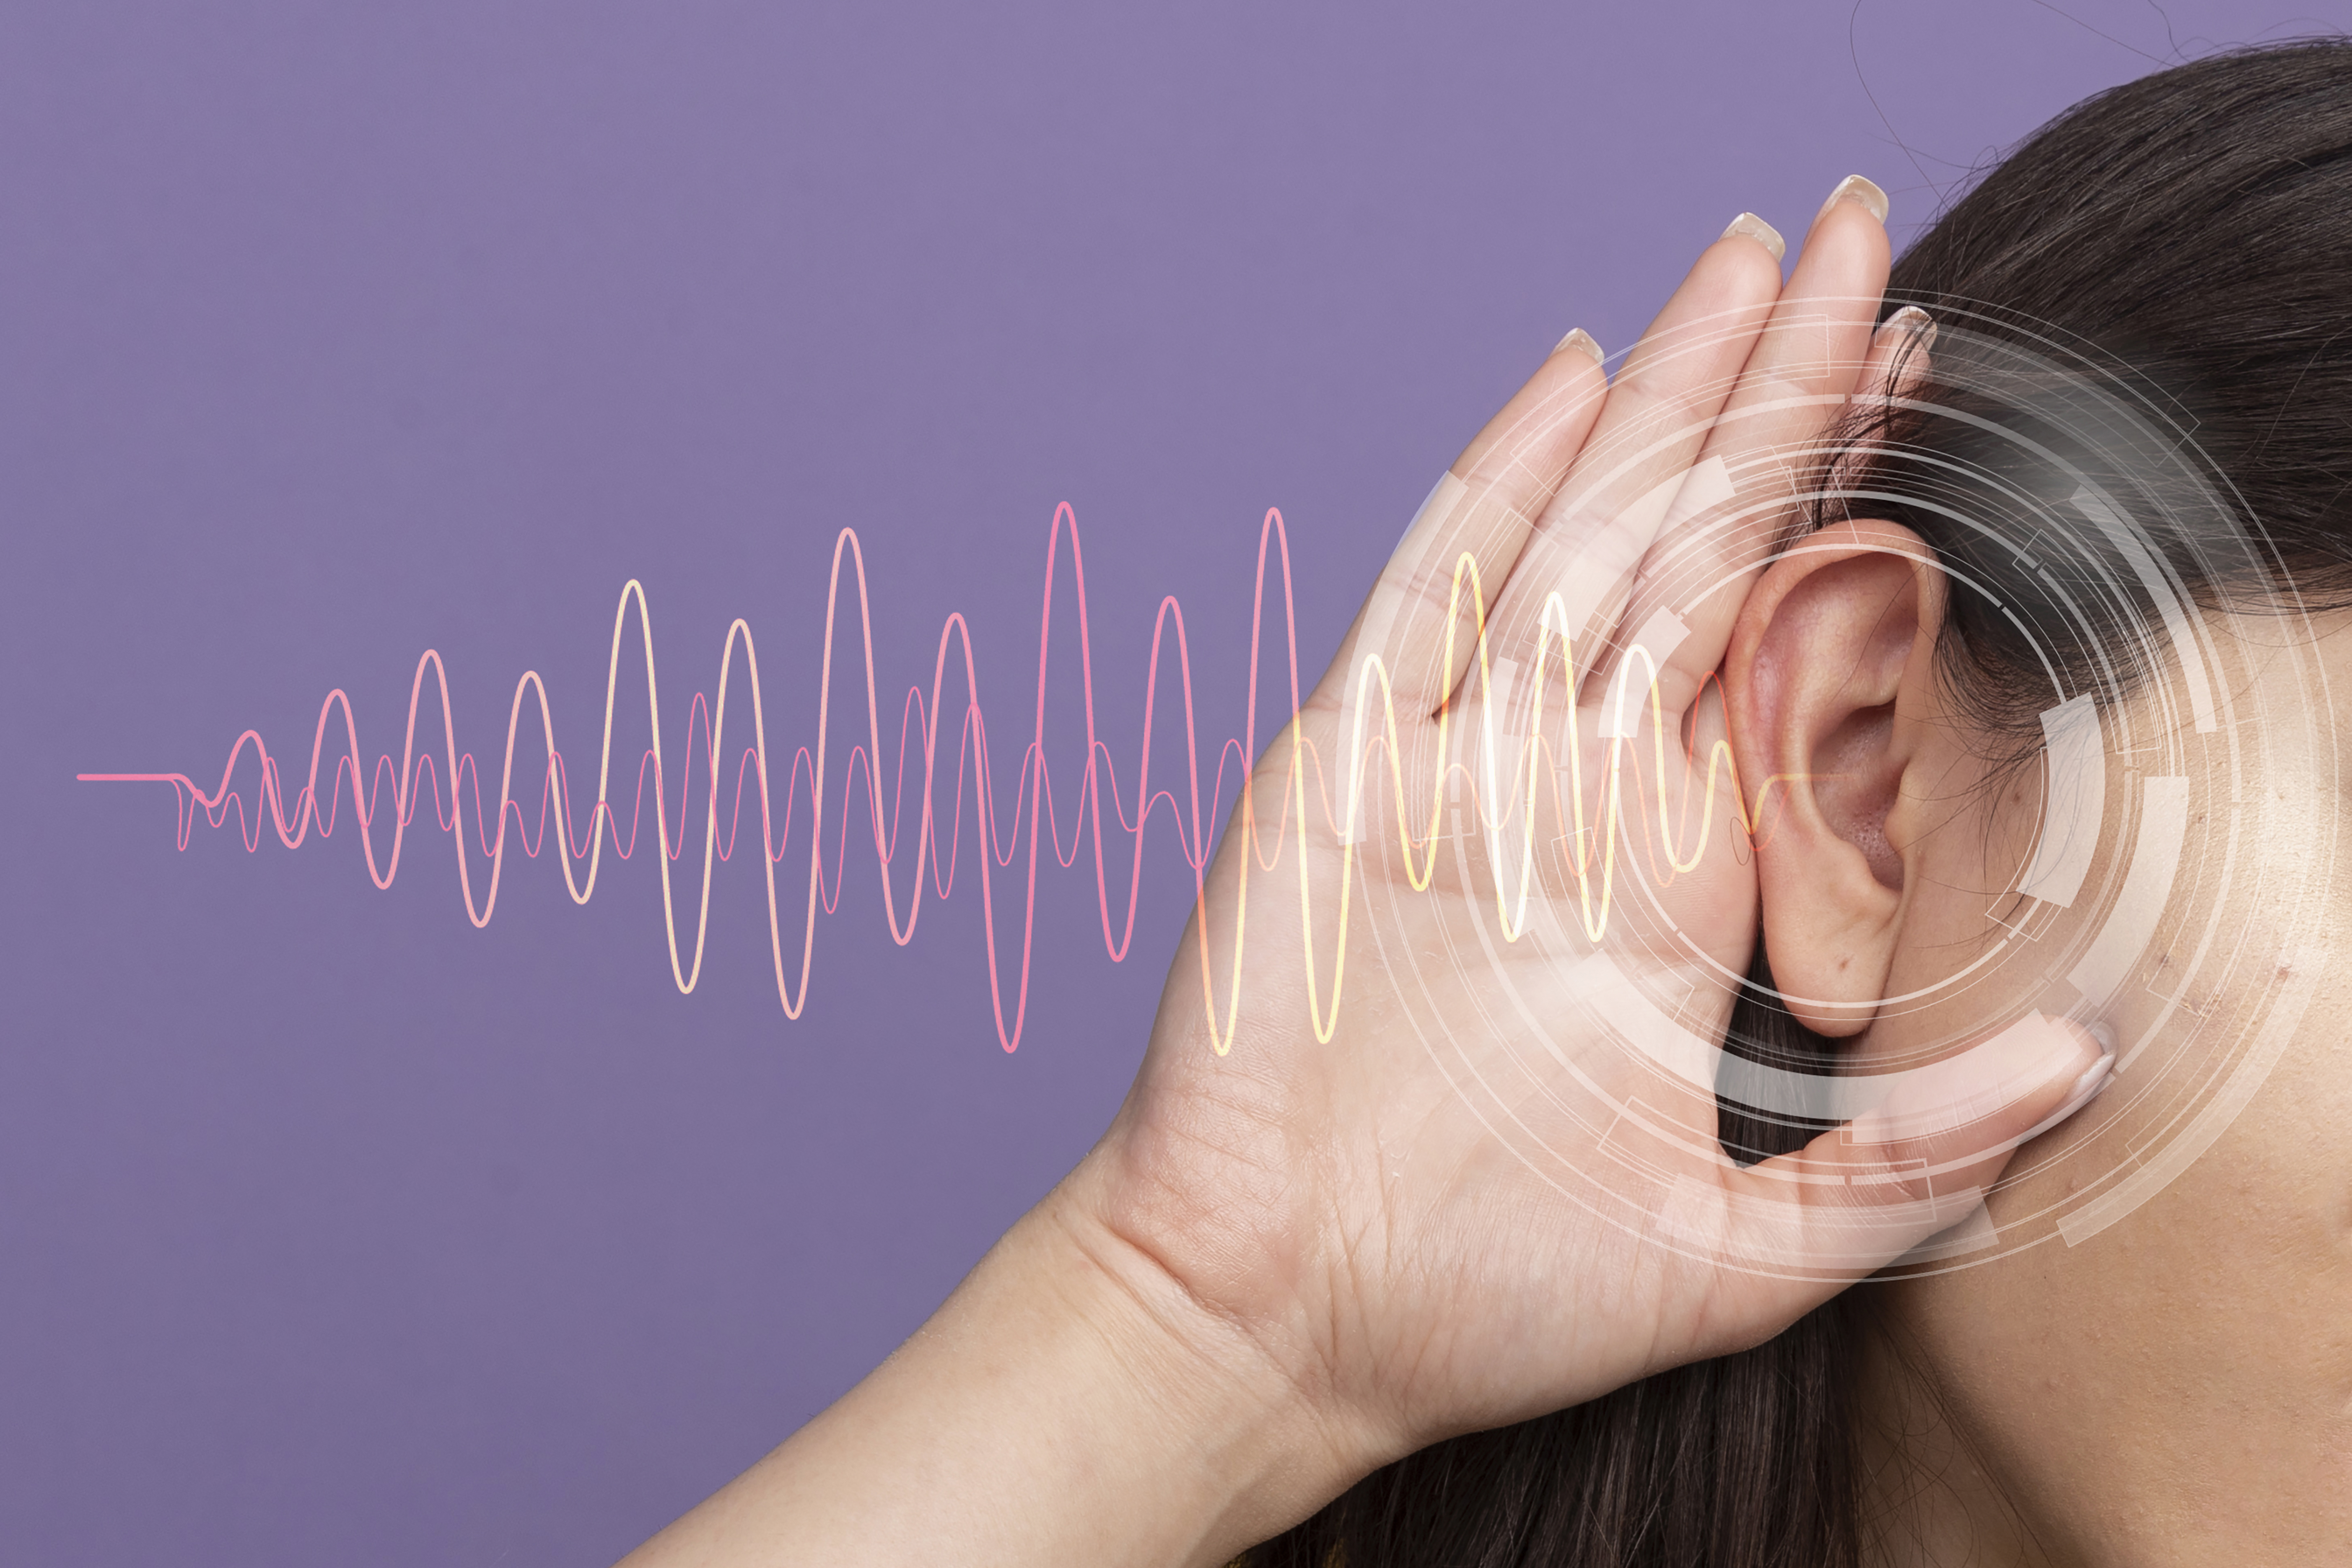 Tepezza MDL Launched to Address Claims Drug Linked to Hearing Loss